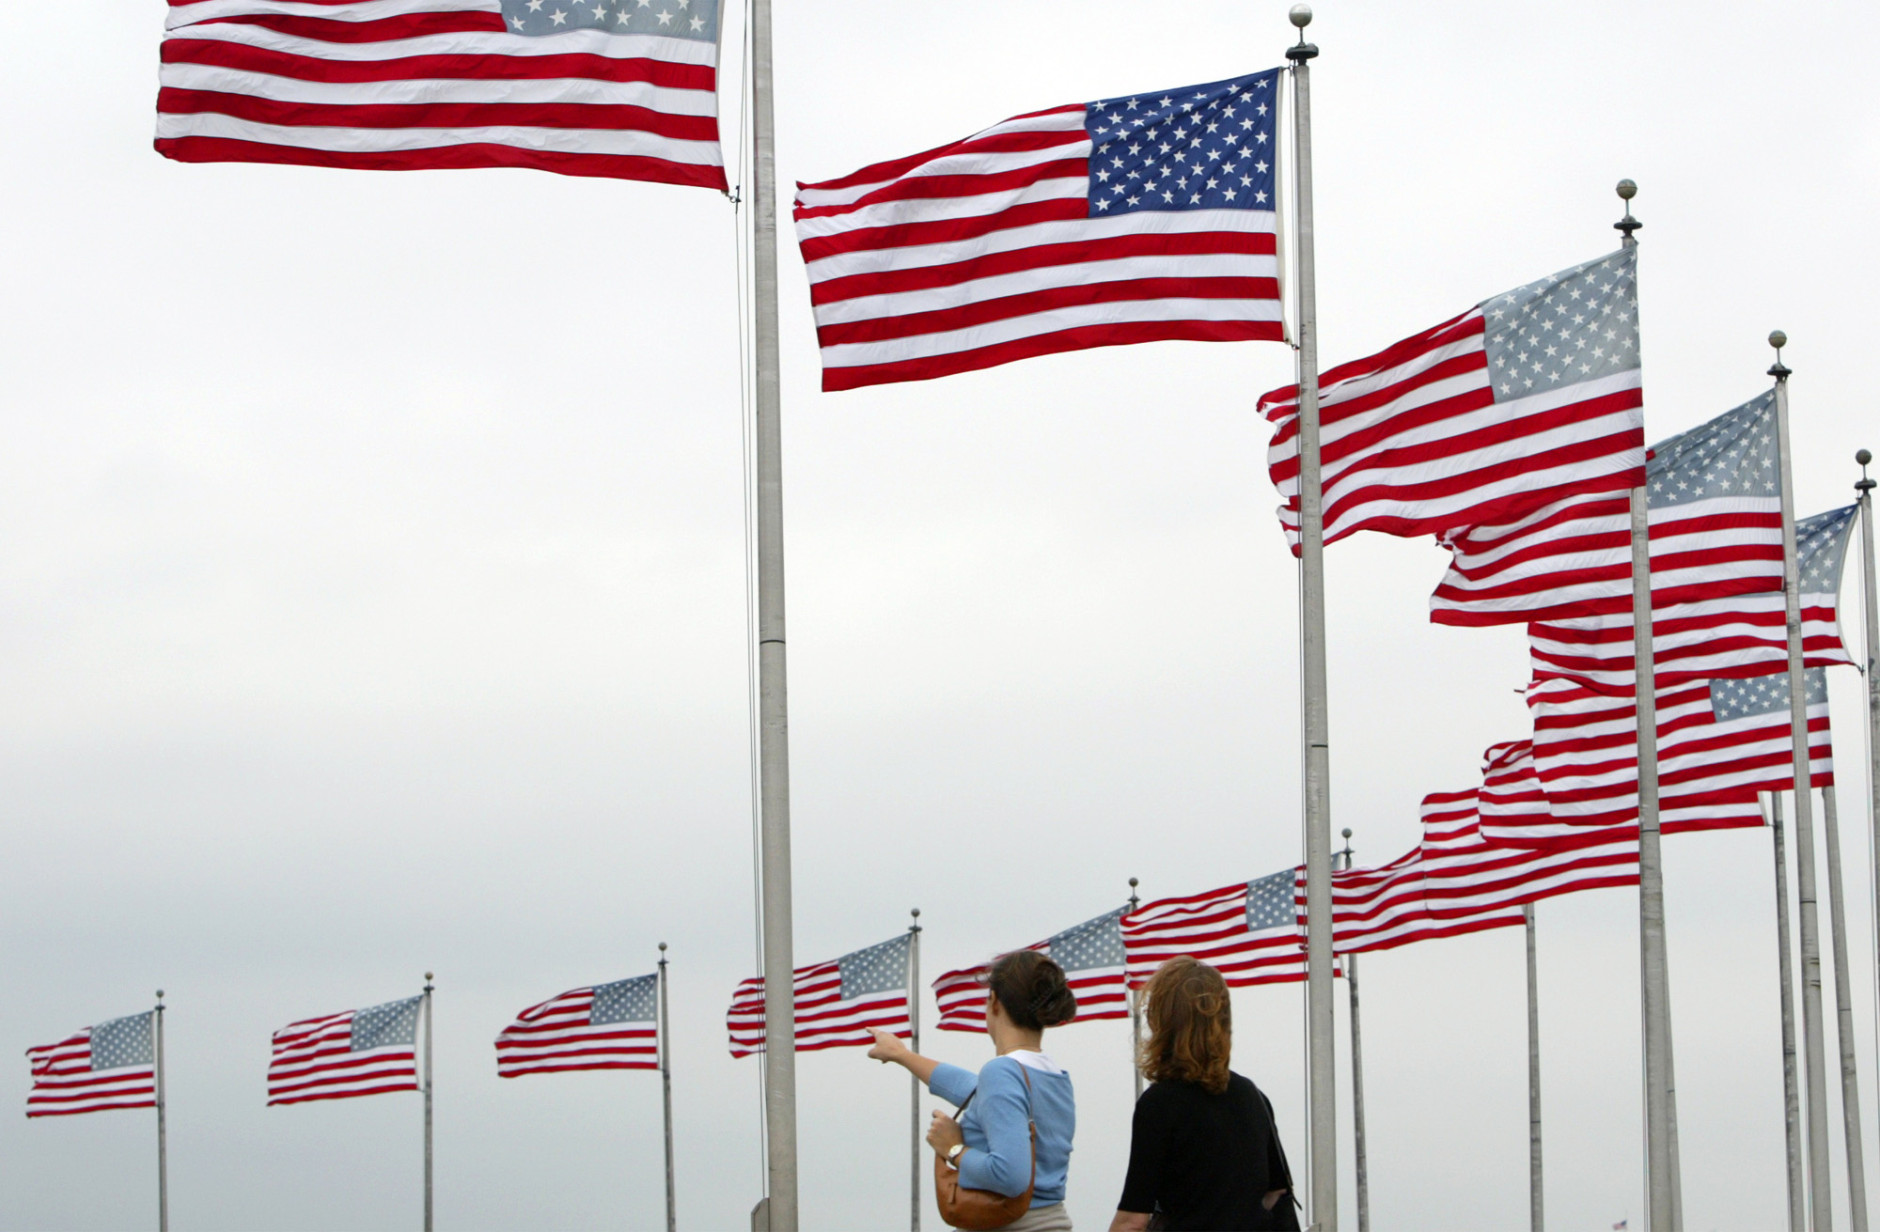 Visitors watch flags blow in the wind around at the Washington Monument Thursday morning, Sept. 18, 2003, as Hurricane Isabel begins to affect the Washington area. (AP Photo/Evan Vucci)